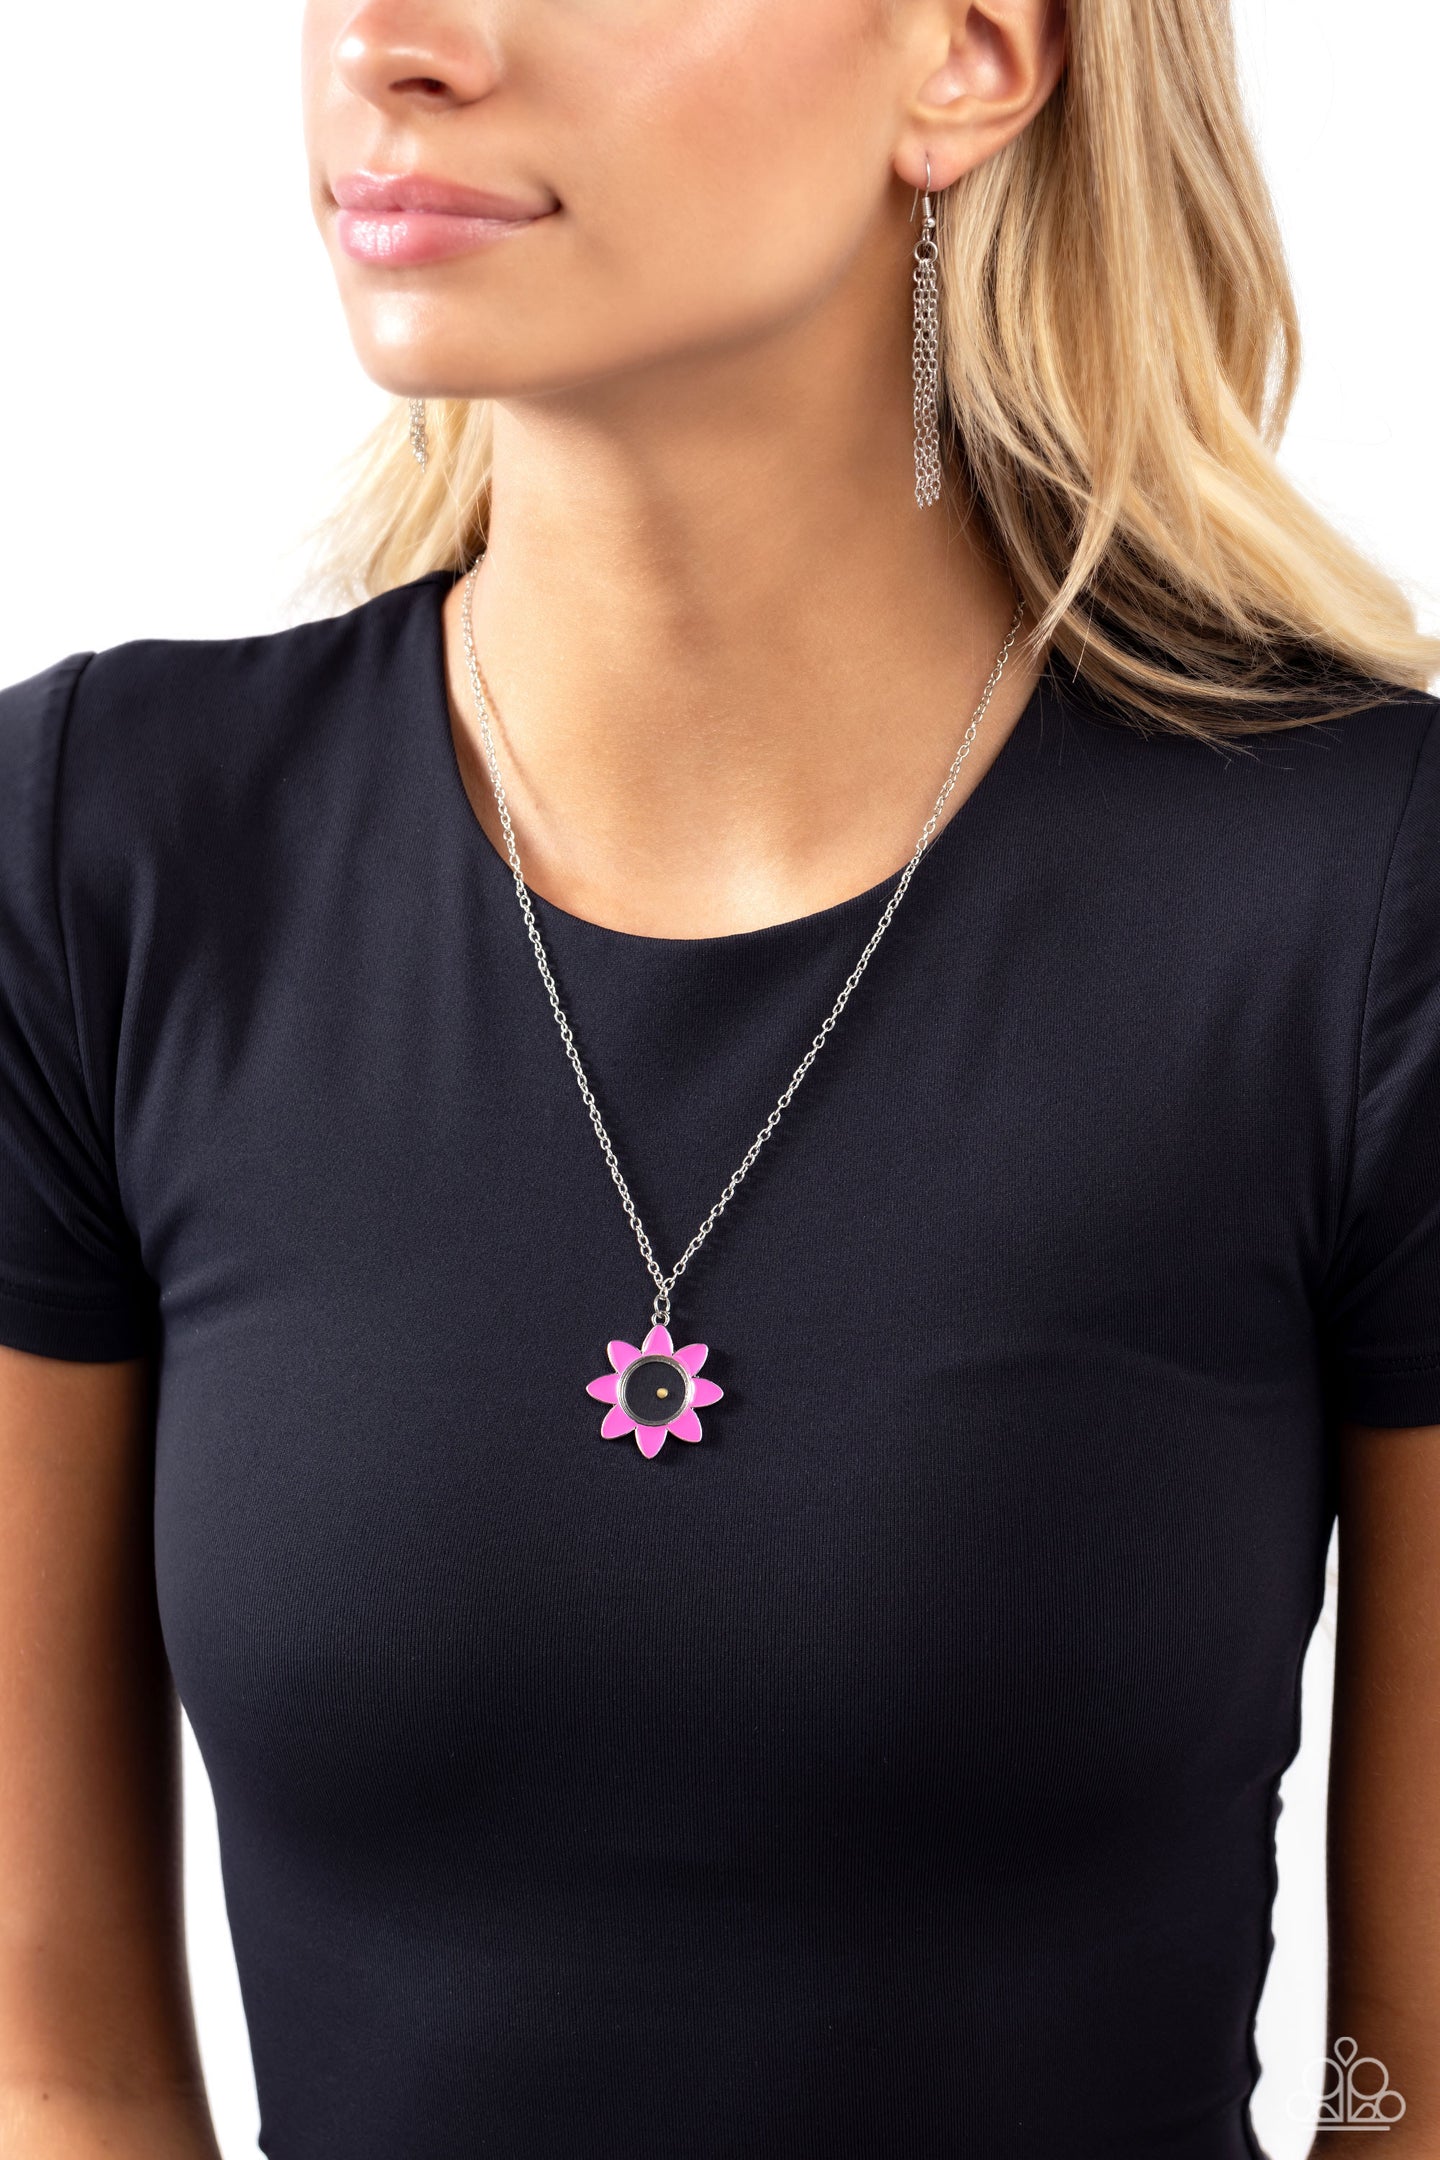 Petals of Inspiration - Pink necklace